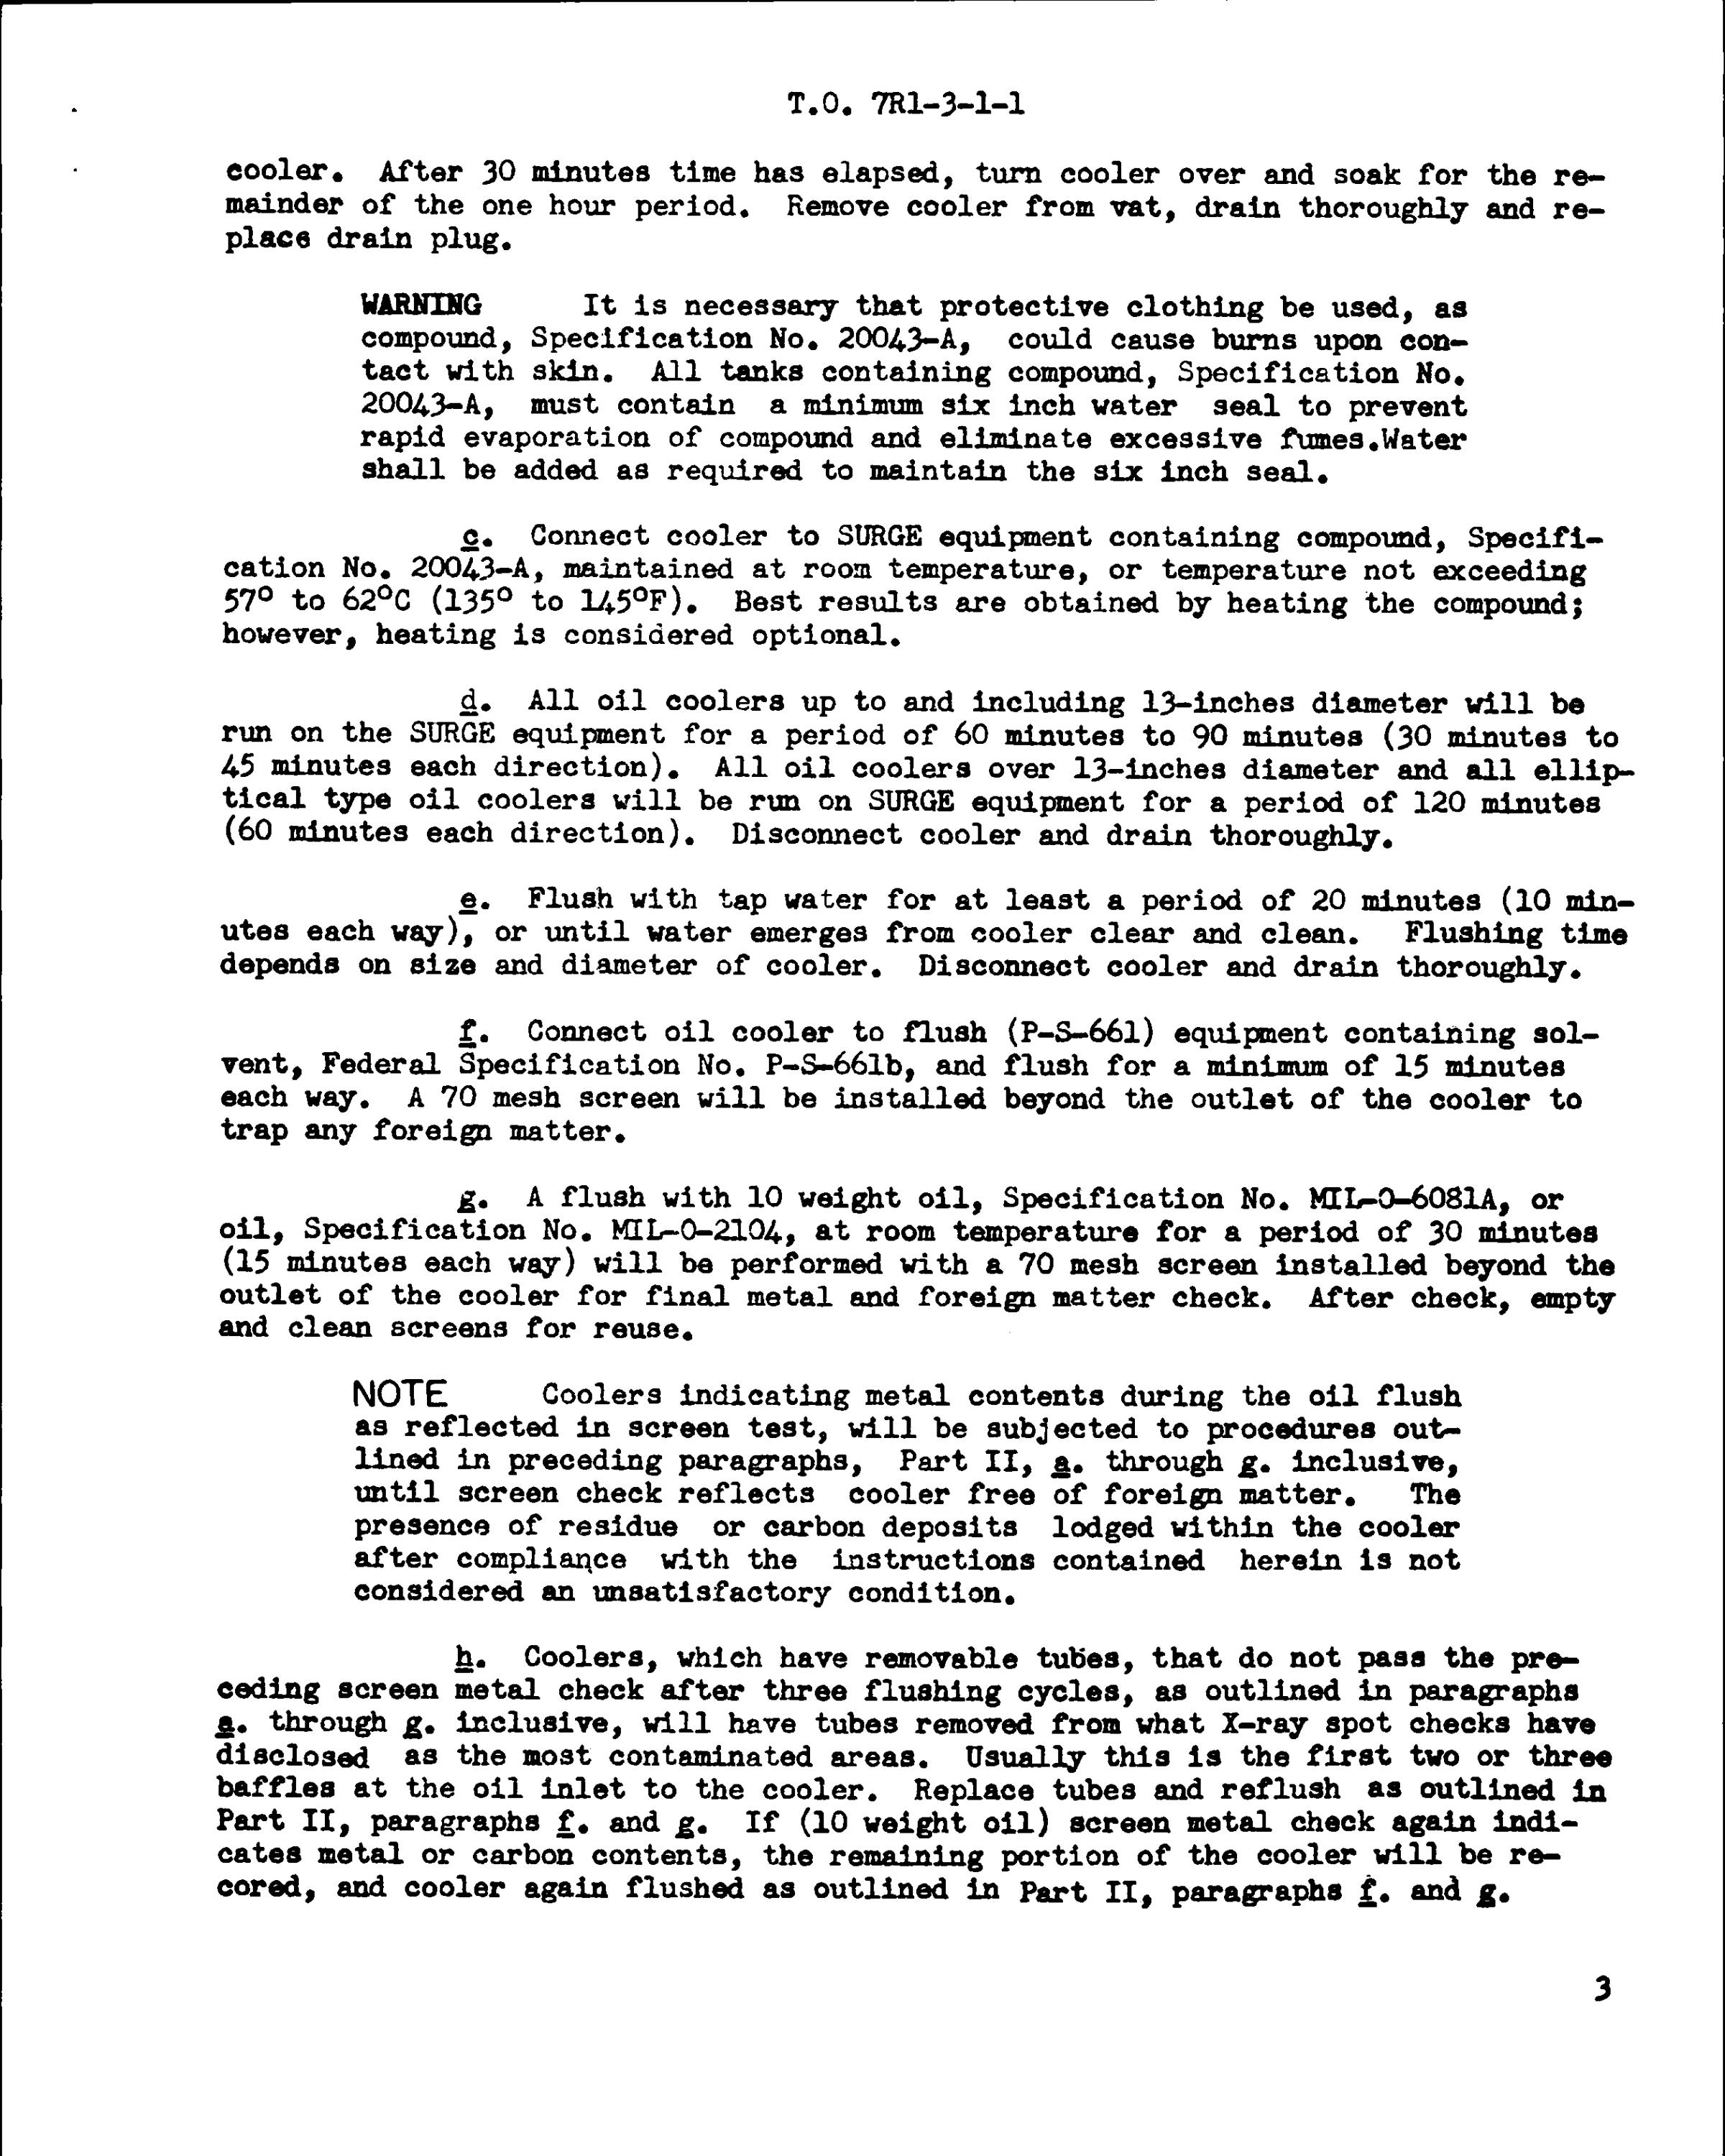 Sample page 3 from AirCorps Library document: Treatment of Air to Oil Cooled Aluminum, Brass & Copper